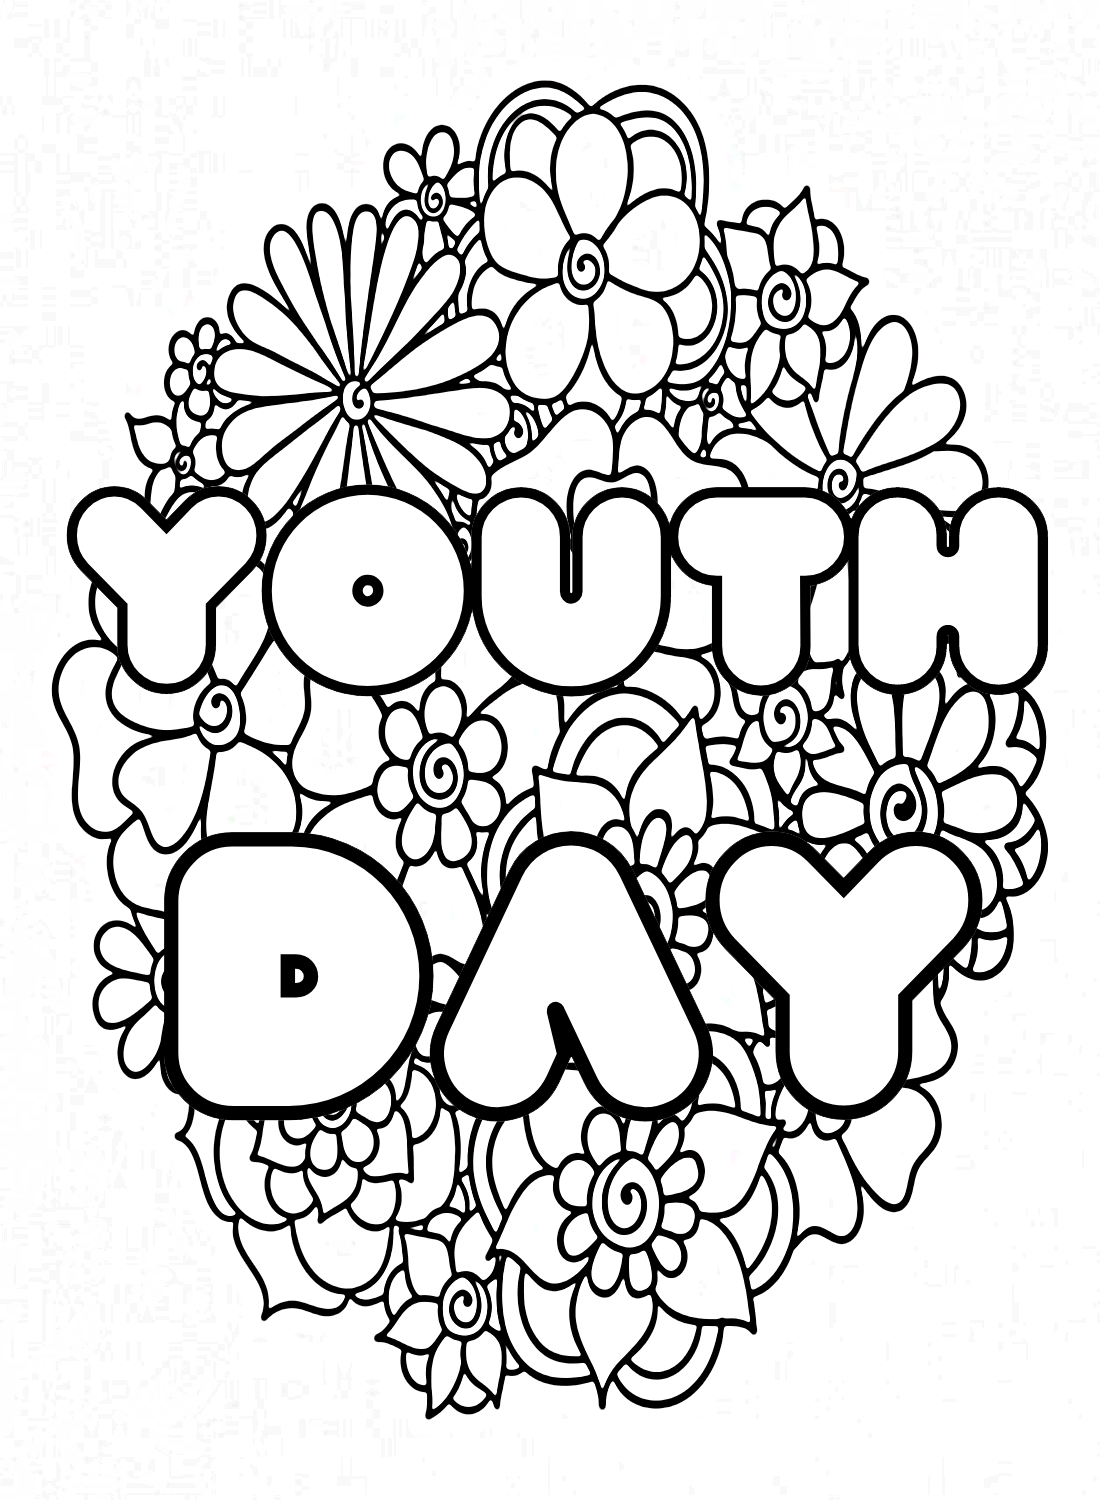 Coloring Pages Youth Day from International Youth Day